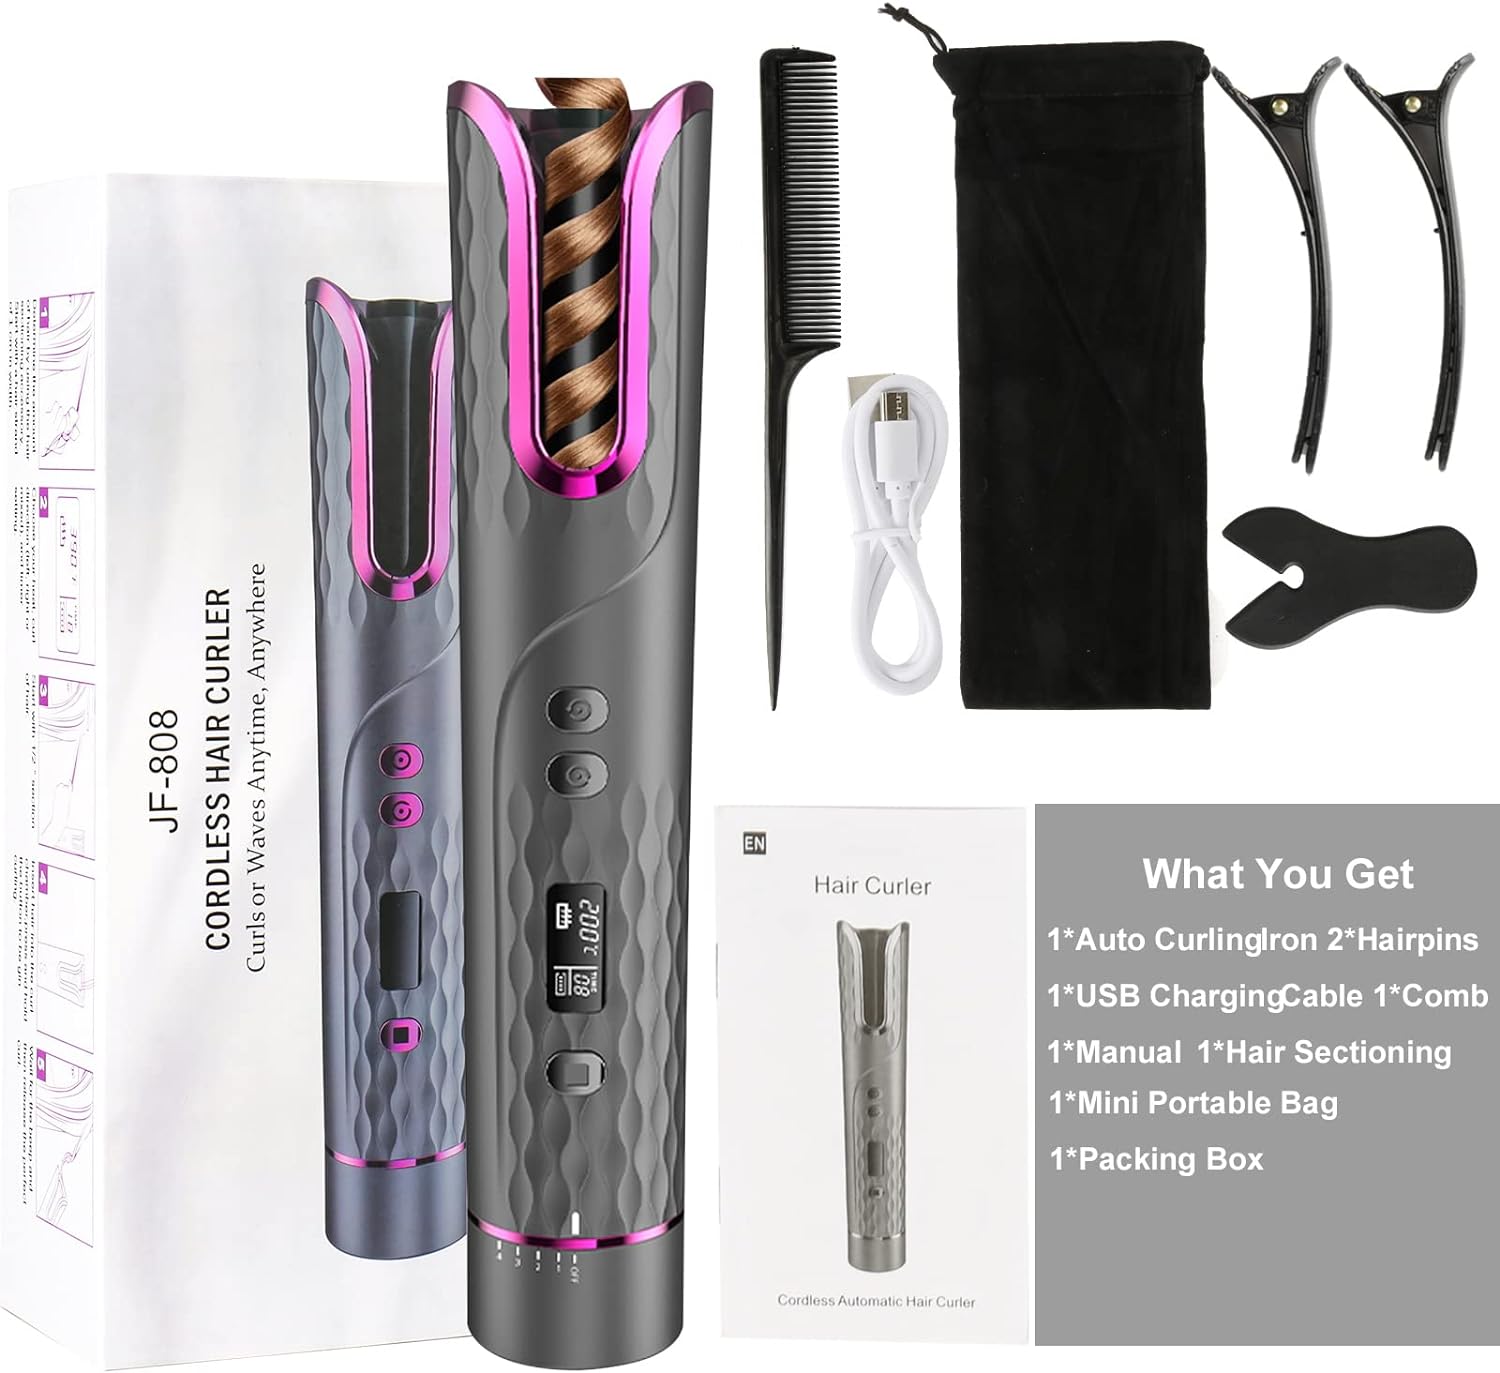 Famulei Cordless Automatic Hair Curler- Automatic Curling Iron with LCD Display